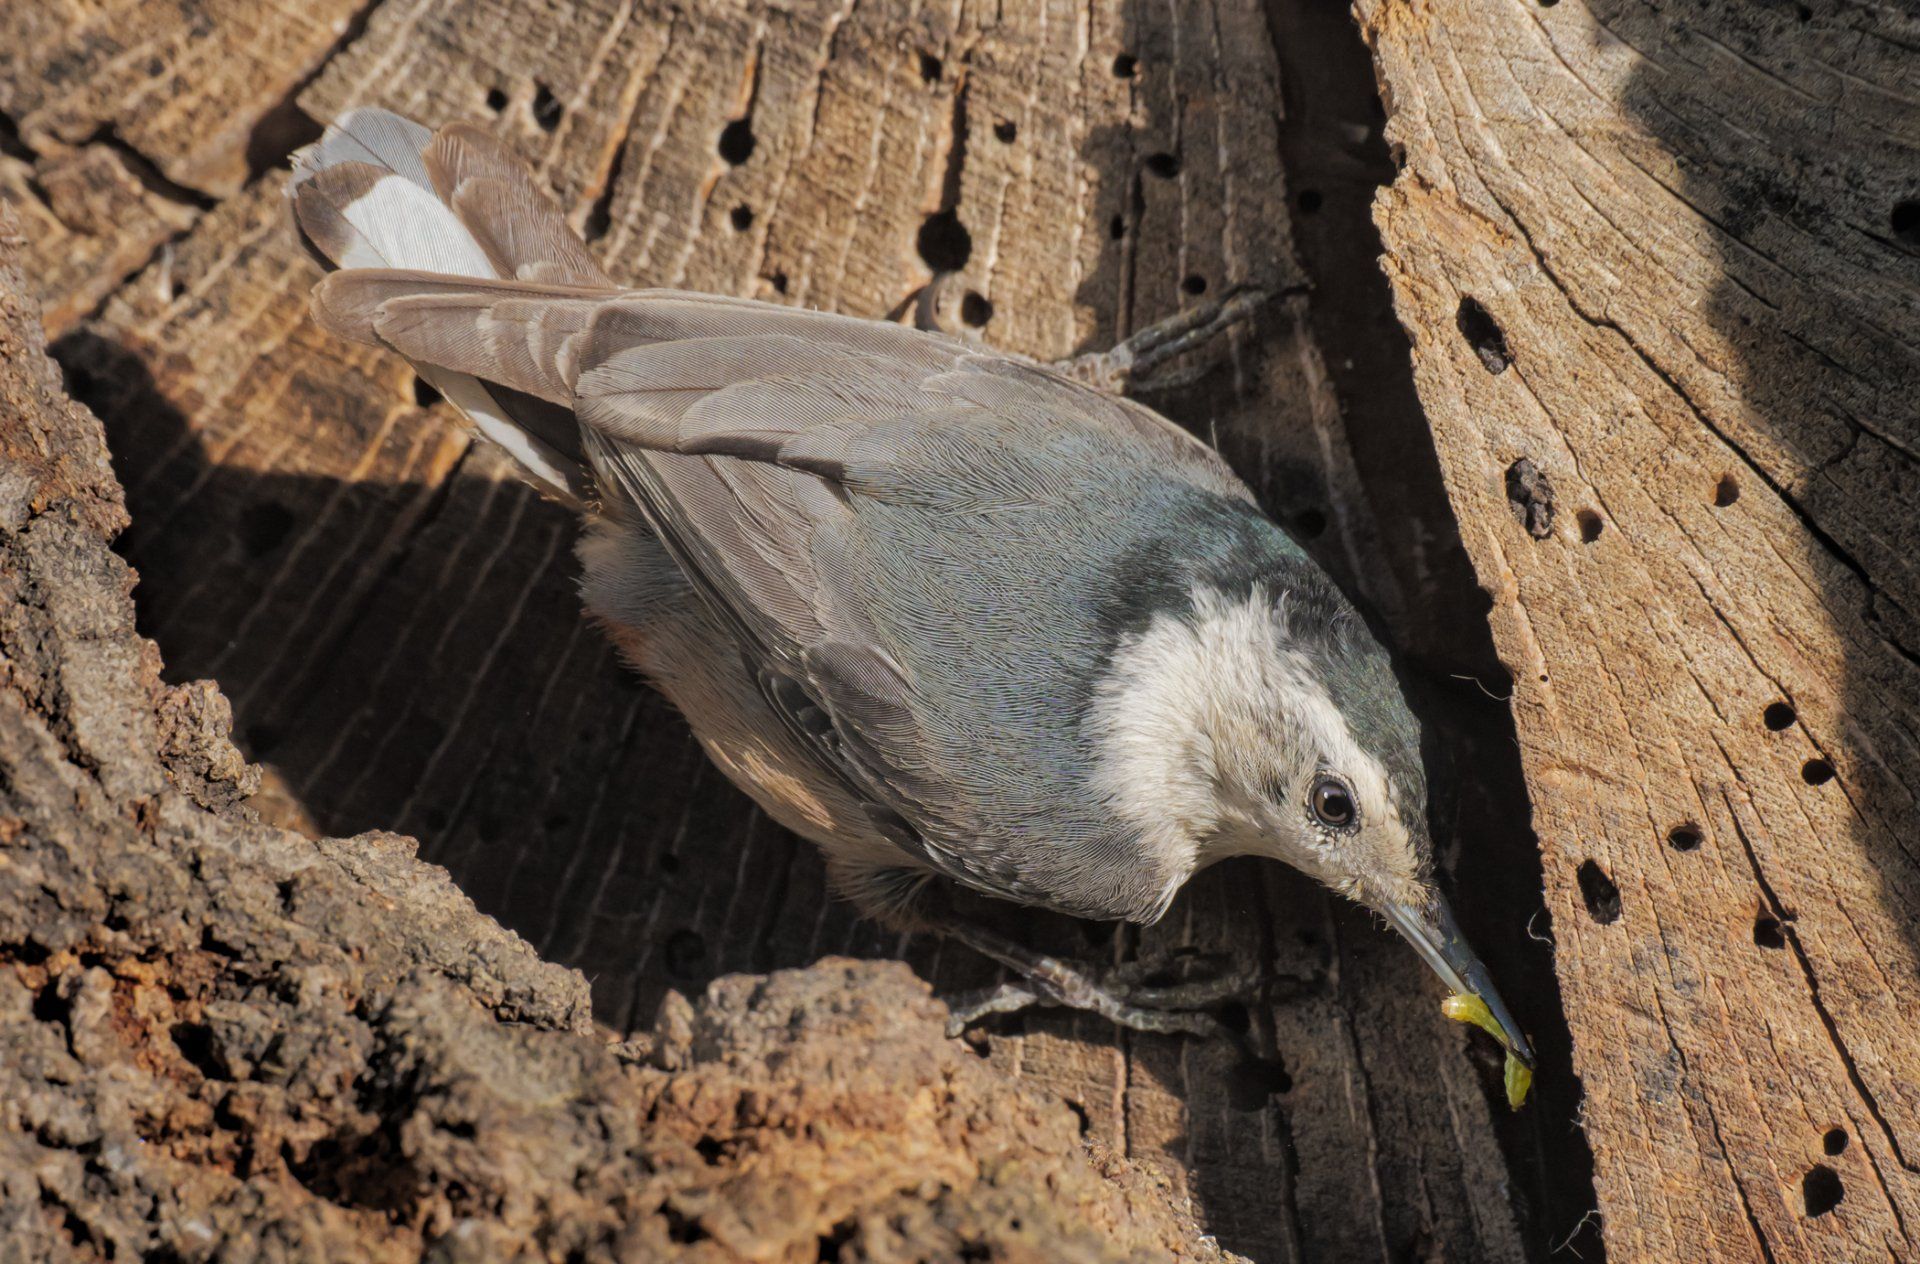 A nuthatch brings food back to the nest.